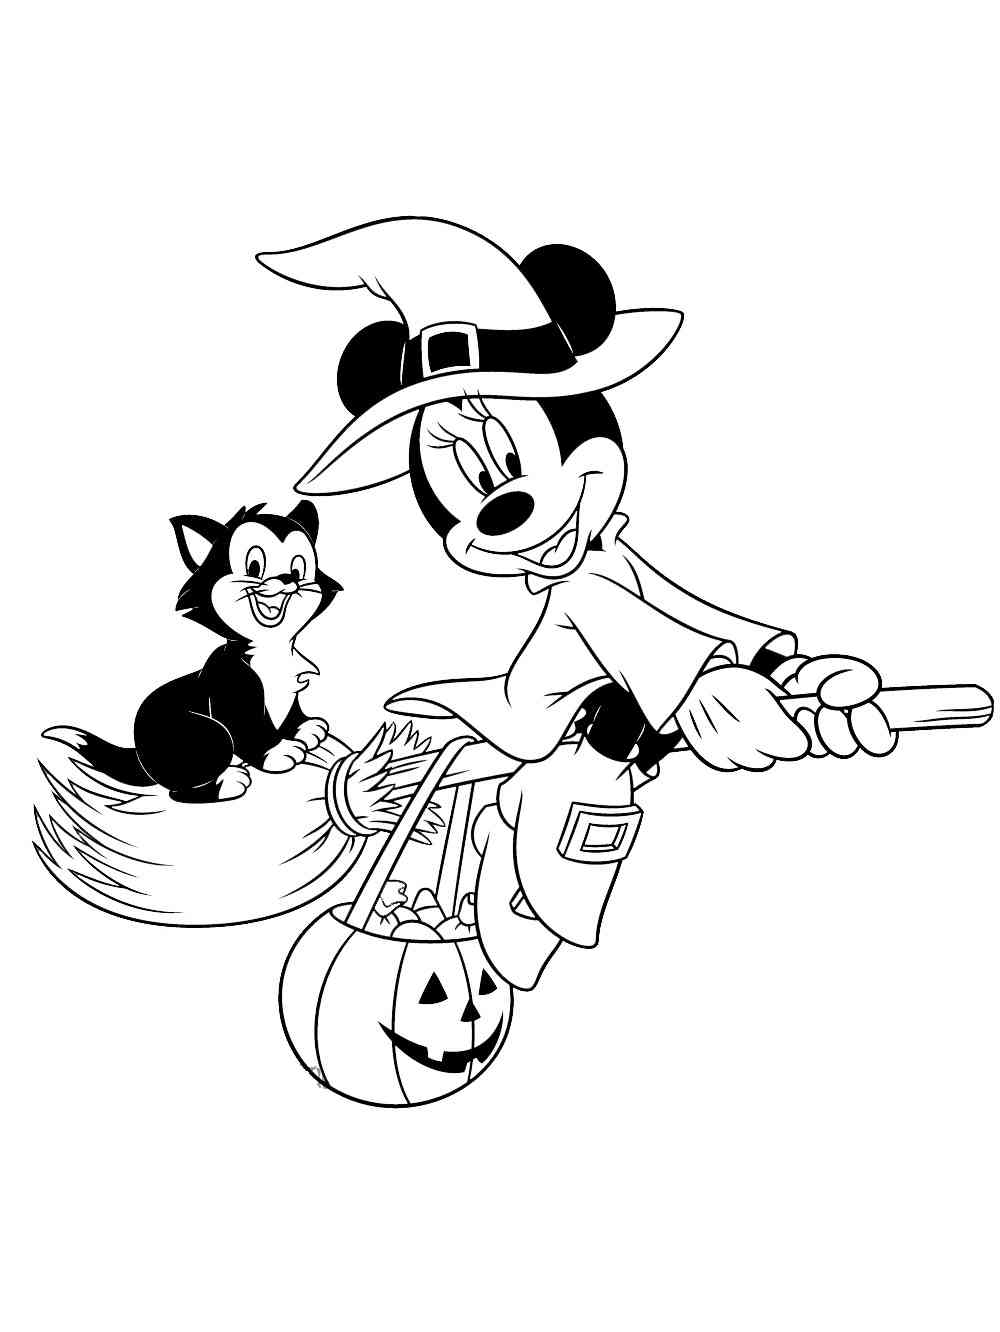 Disney Halloween 5 coloring page